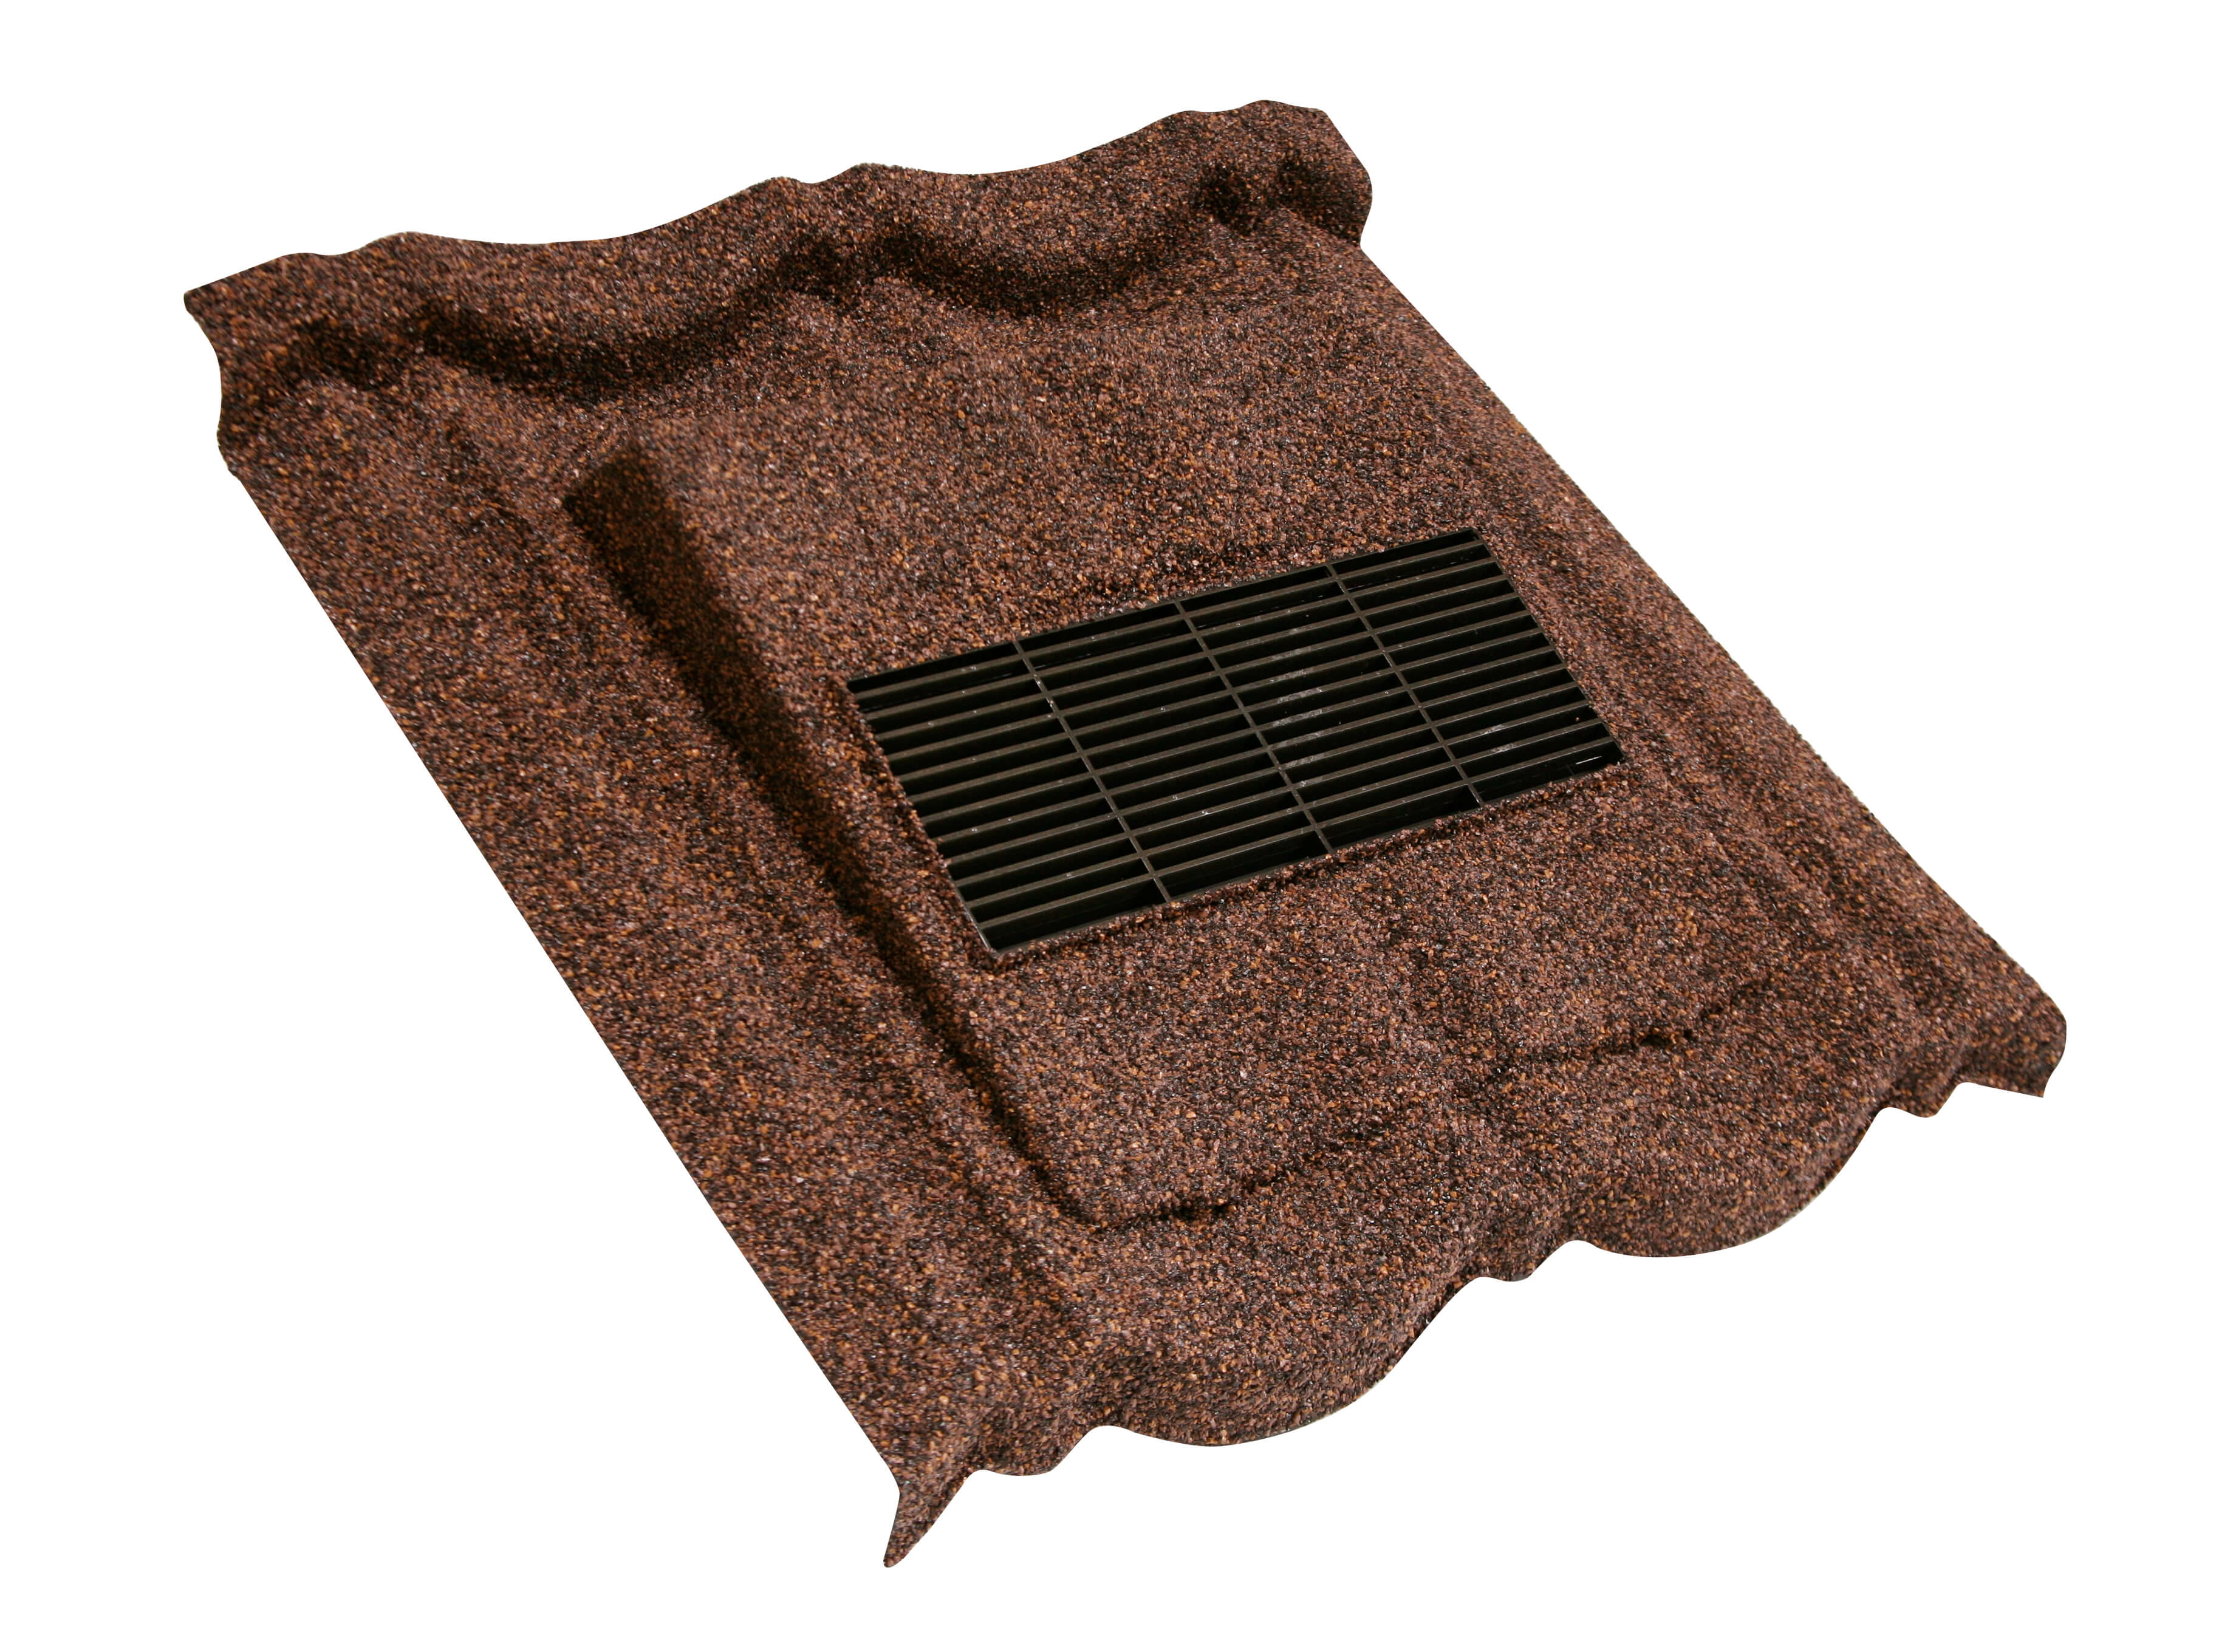 Metrotile Lightweight Roofing Accessories Bond Vent